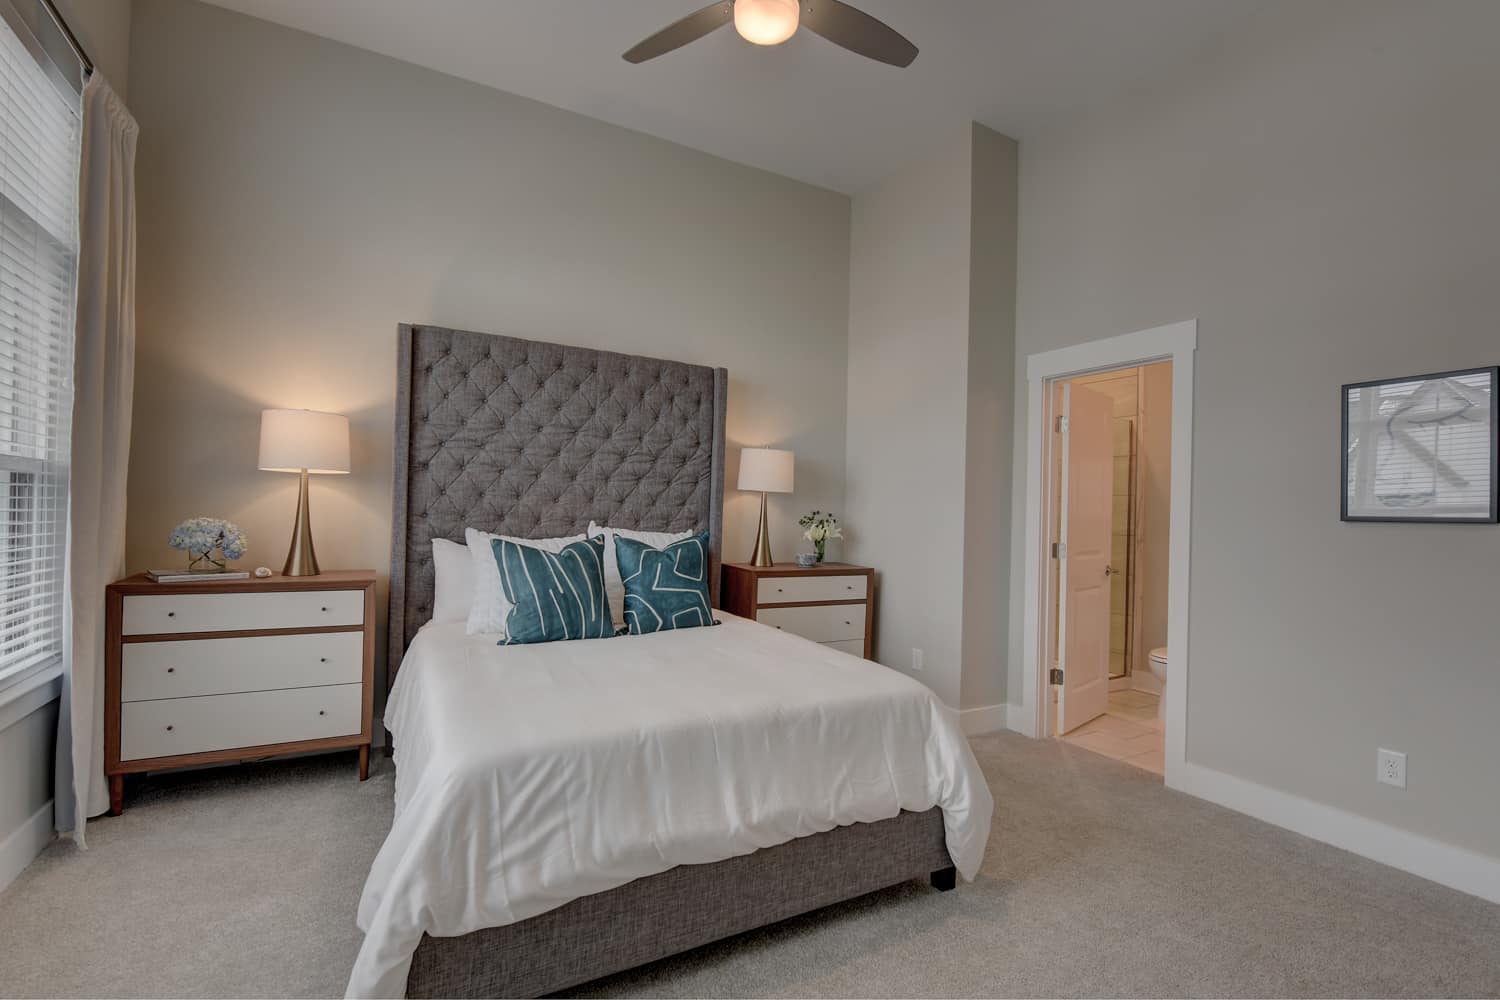 The Highlands at Stoneridge - Interior view of a bedroom with a bed in a room